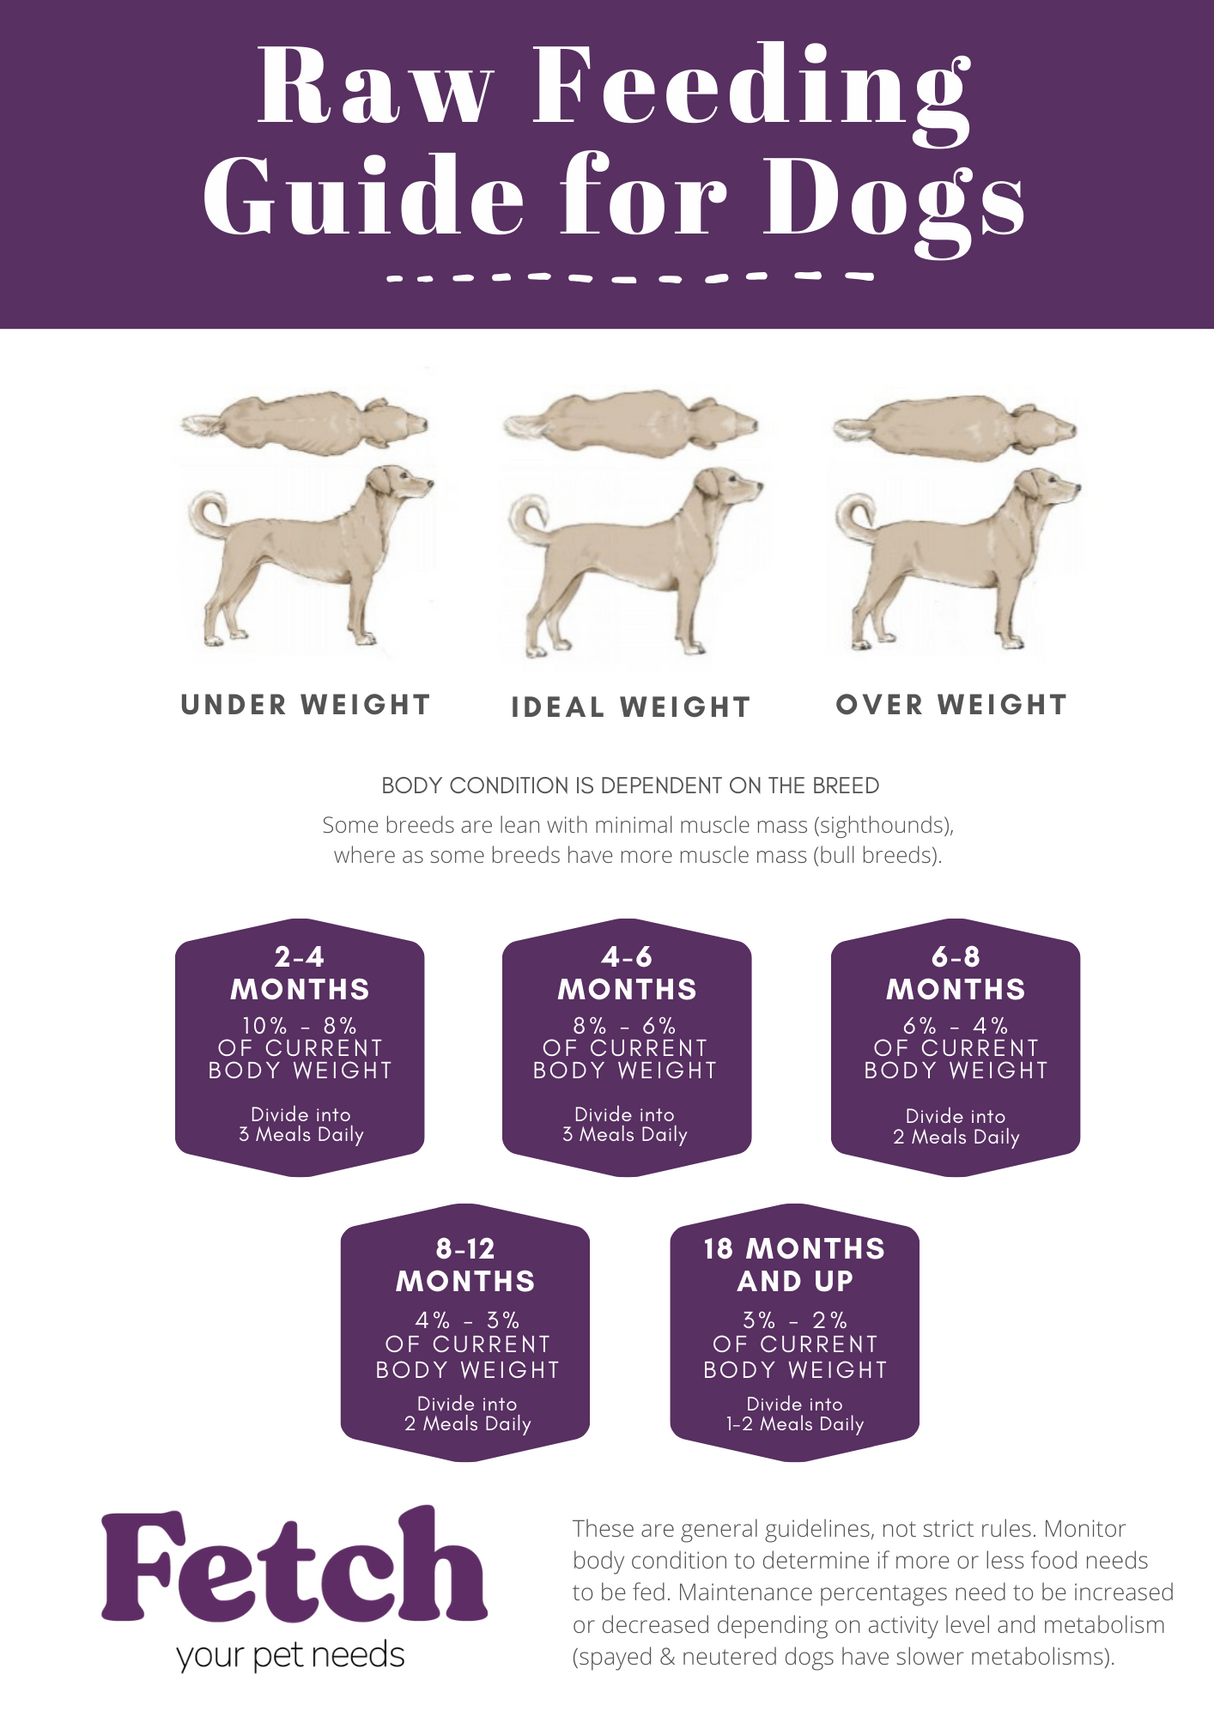 Raw Feeding Guide for Dogs.